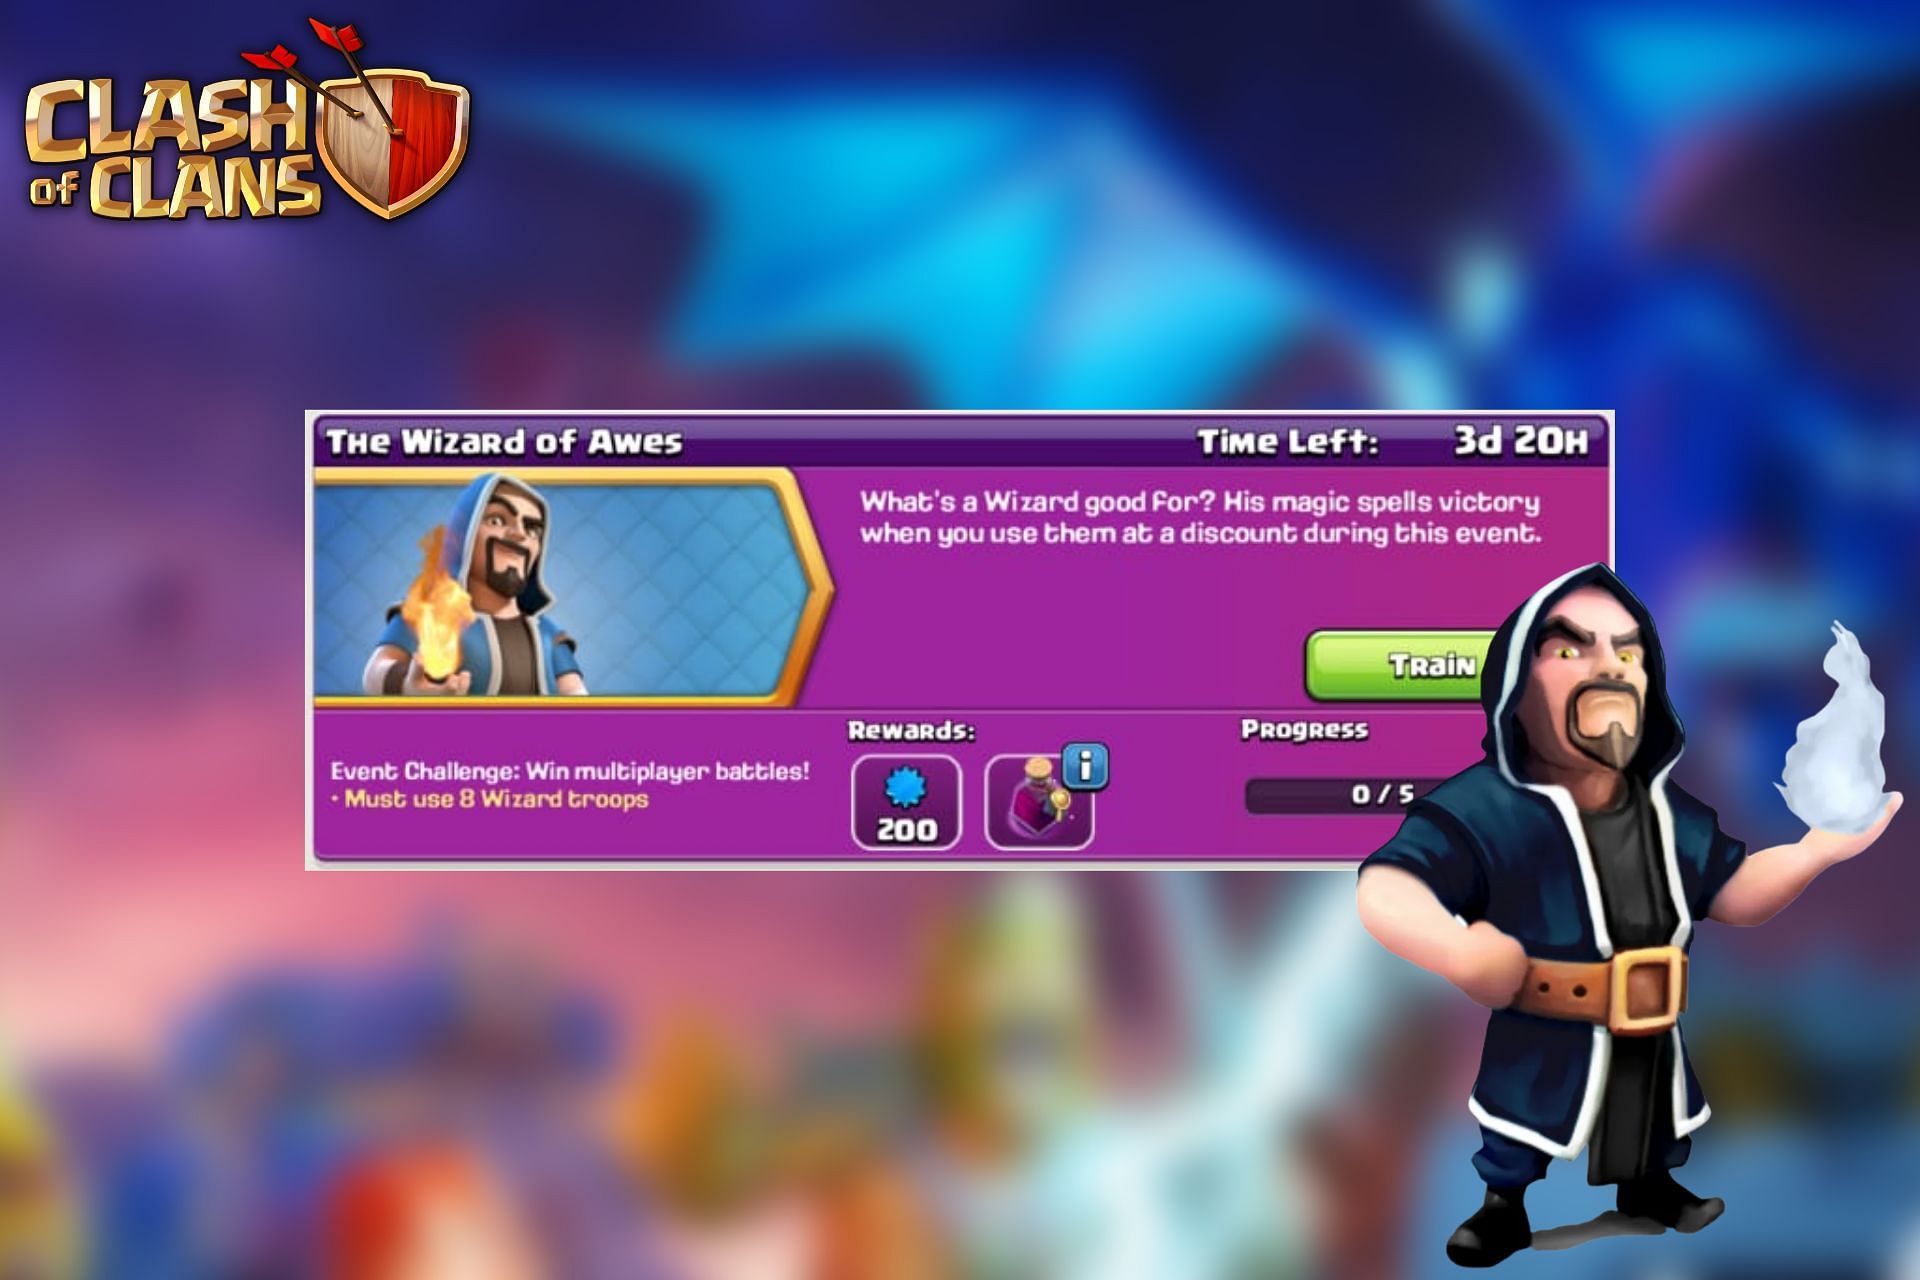 Wizard of Awes challenge in Clash of Clans (Image via Sportskeeda)